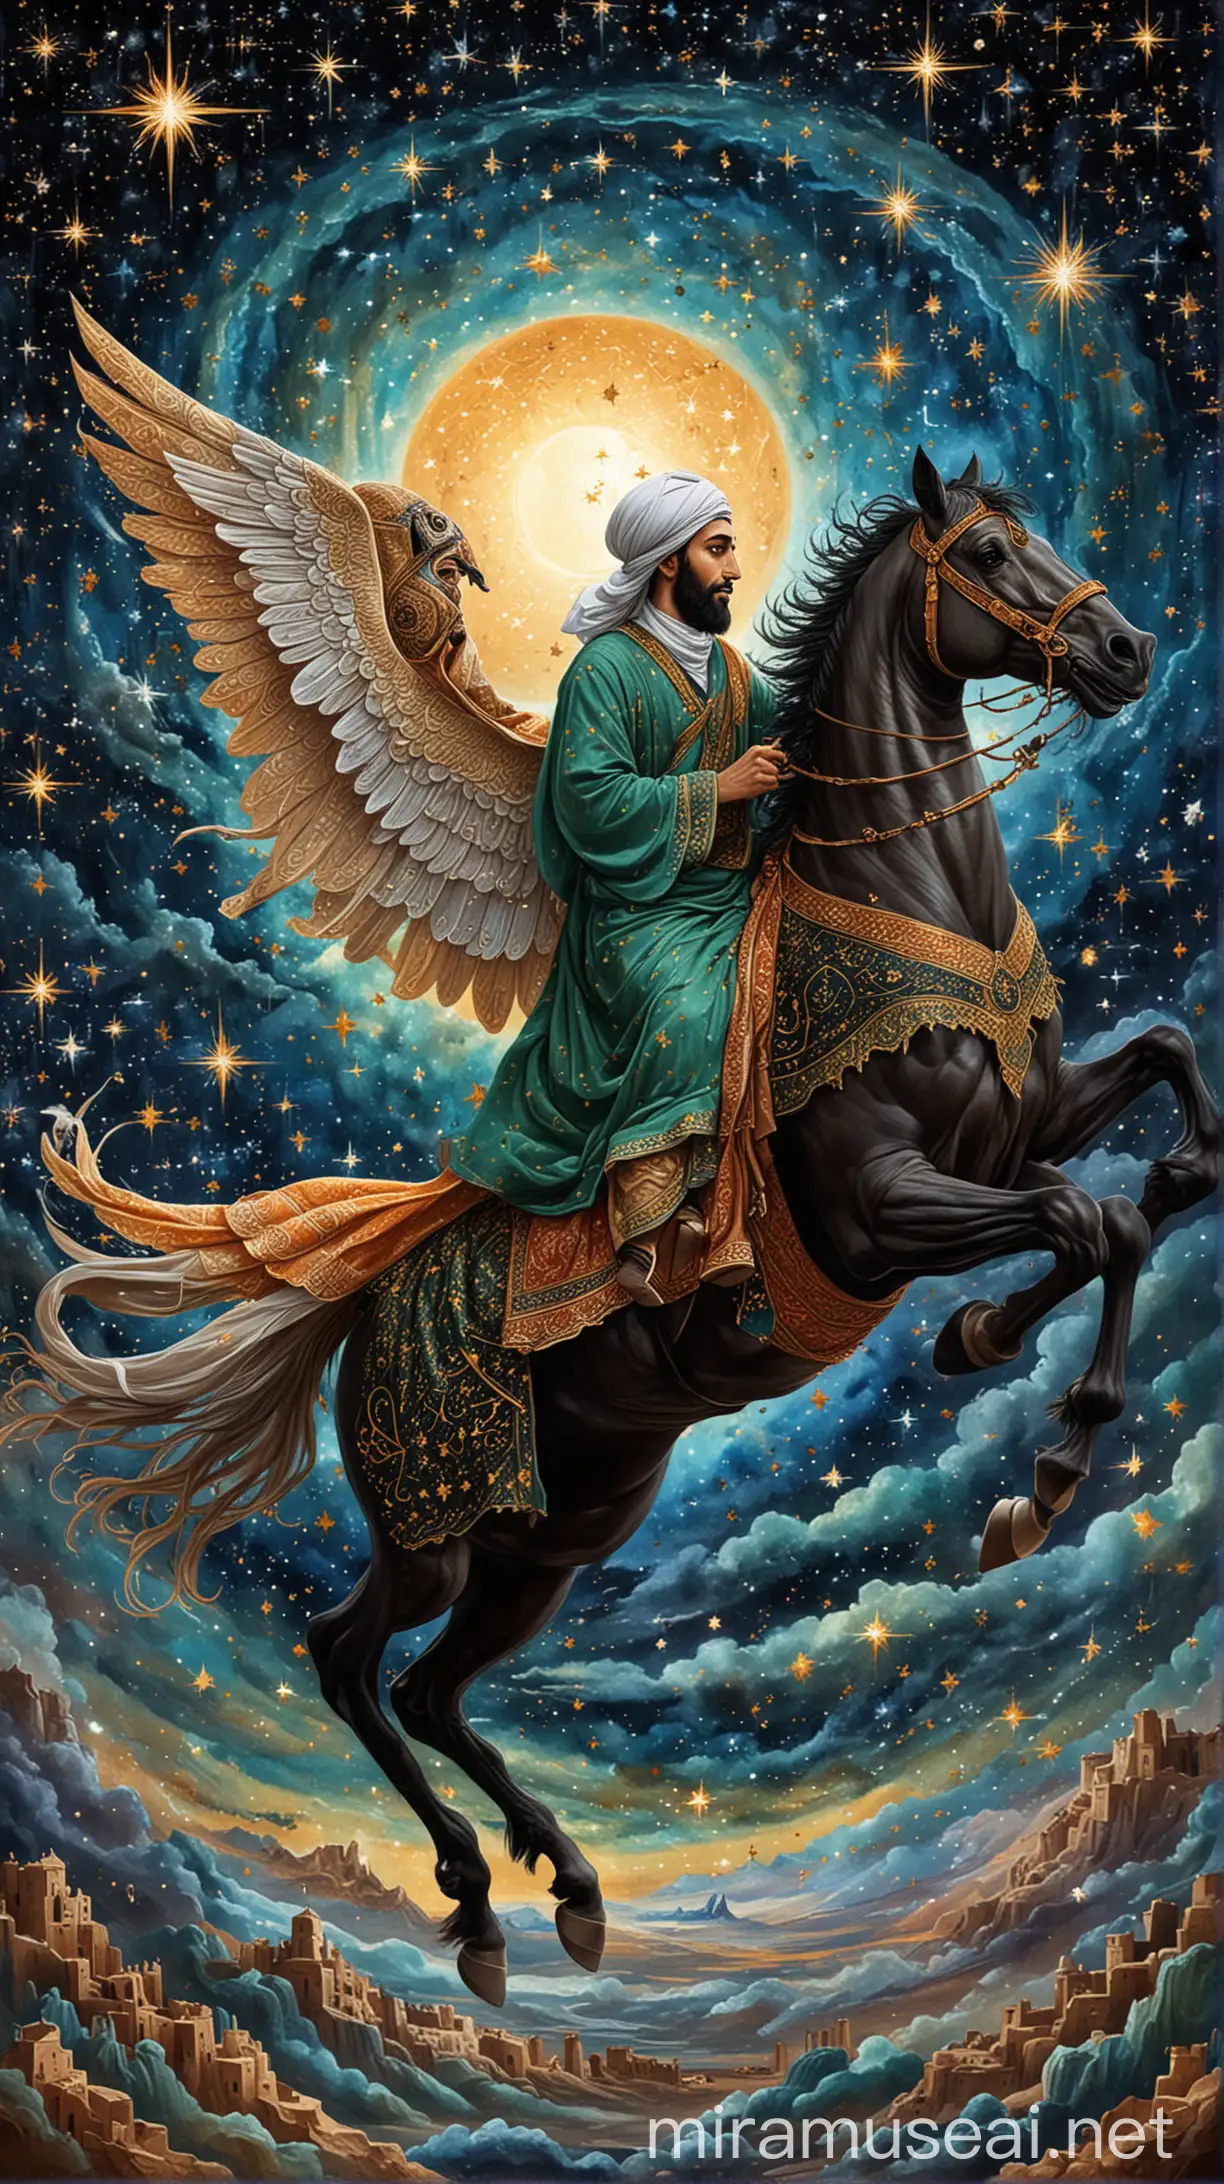 D: Prophet Muhammad's (PBUH) Night Journey (Isra and Miraj)
A majestic depiction of Prophet Muhammad (PBUH) riding the winged horse Buraq, ascending through a vibrant night sky filled with stars and celestial bodies. Emphasize Islamic geometric patterns ($K) in the background and the Prophet's (PBUH) peaceful expression.